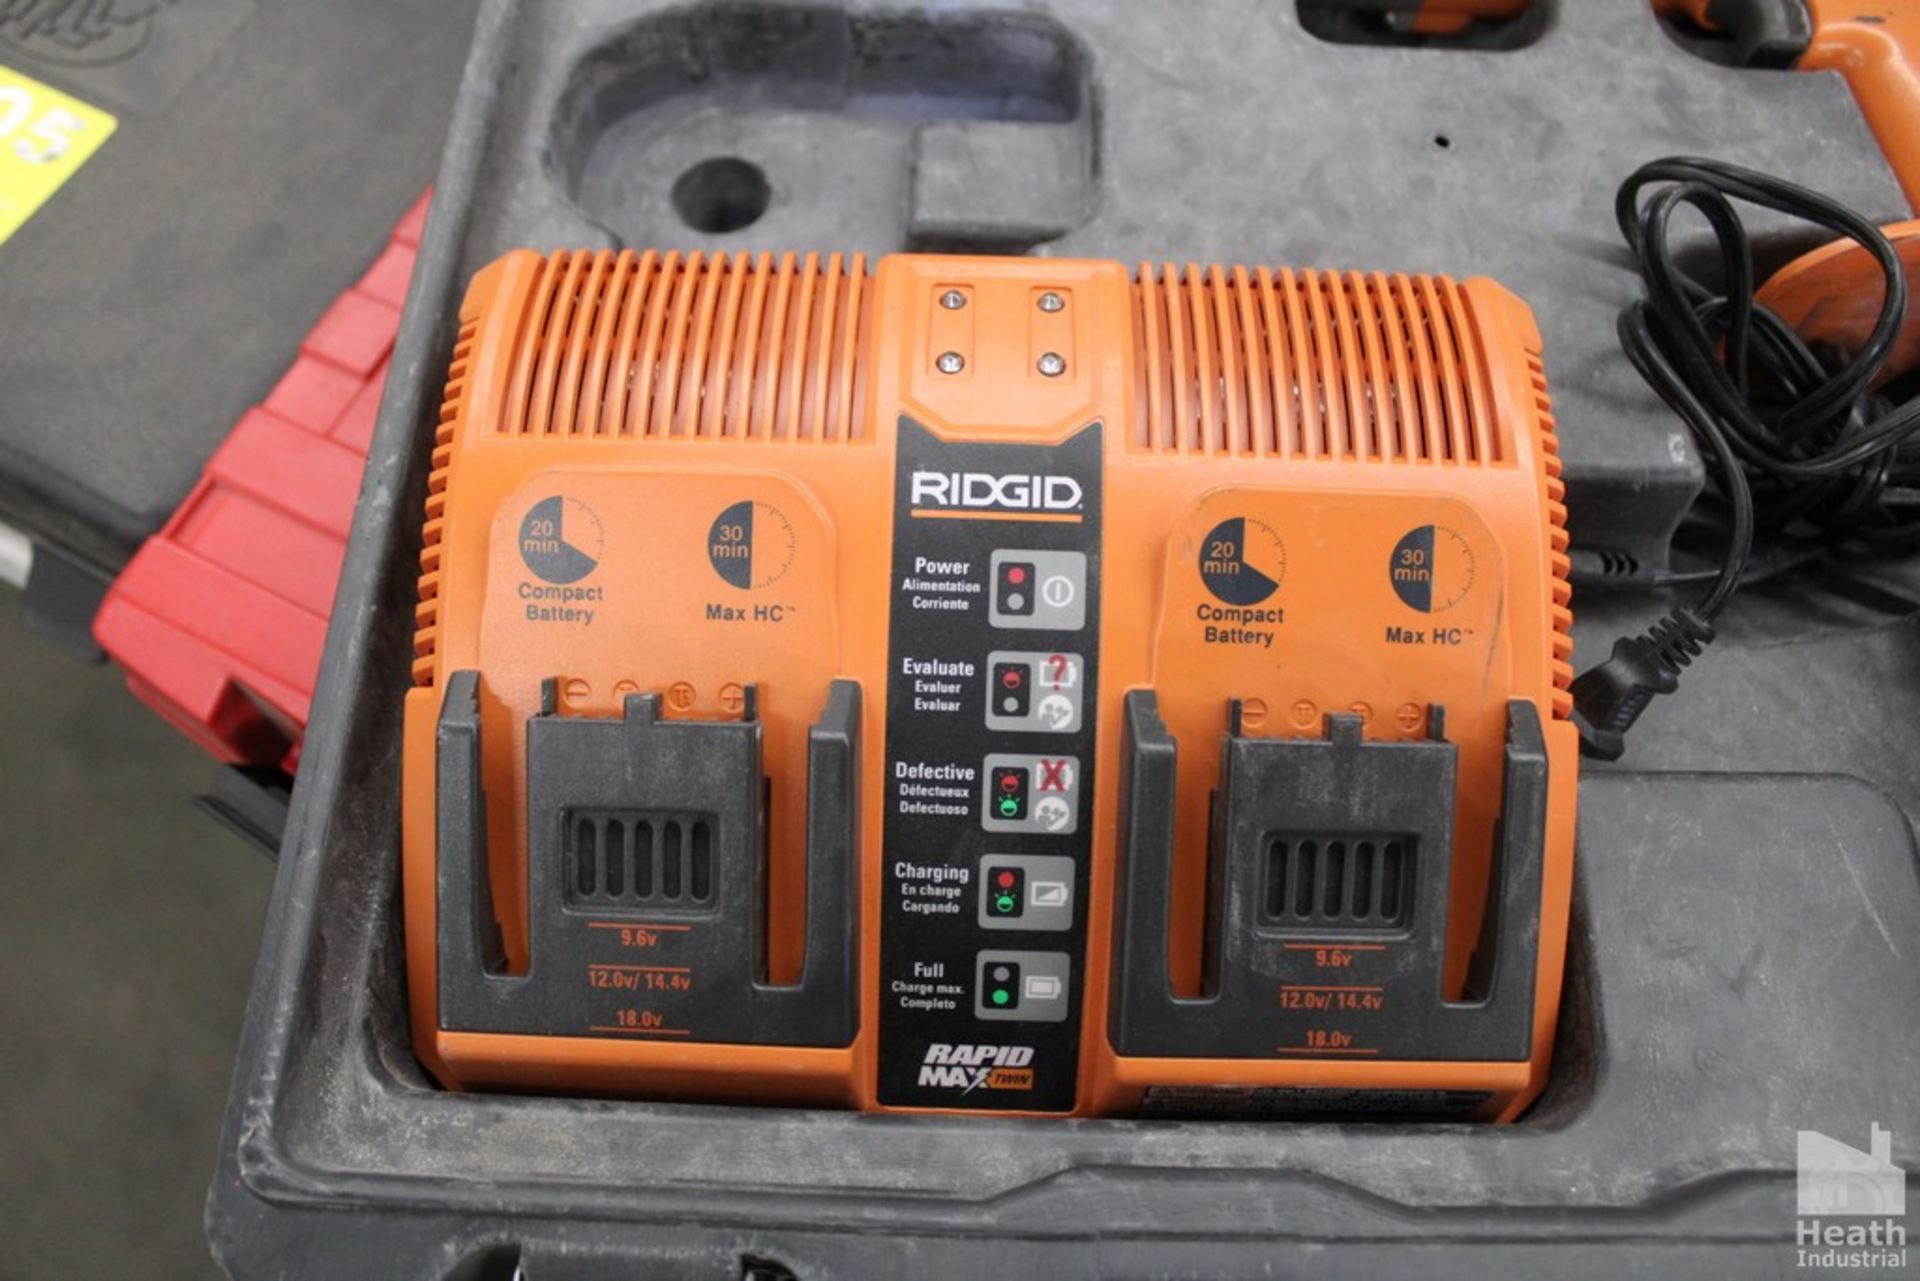 RIDGID MODEL R841151 1/2" CORDLESS DRILL/DRIVER WITH BATTERY, CHARGER AND CASE - Image 3 of 4